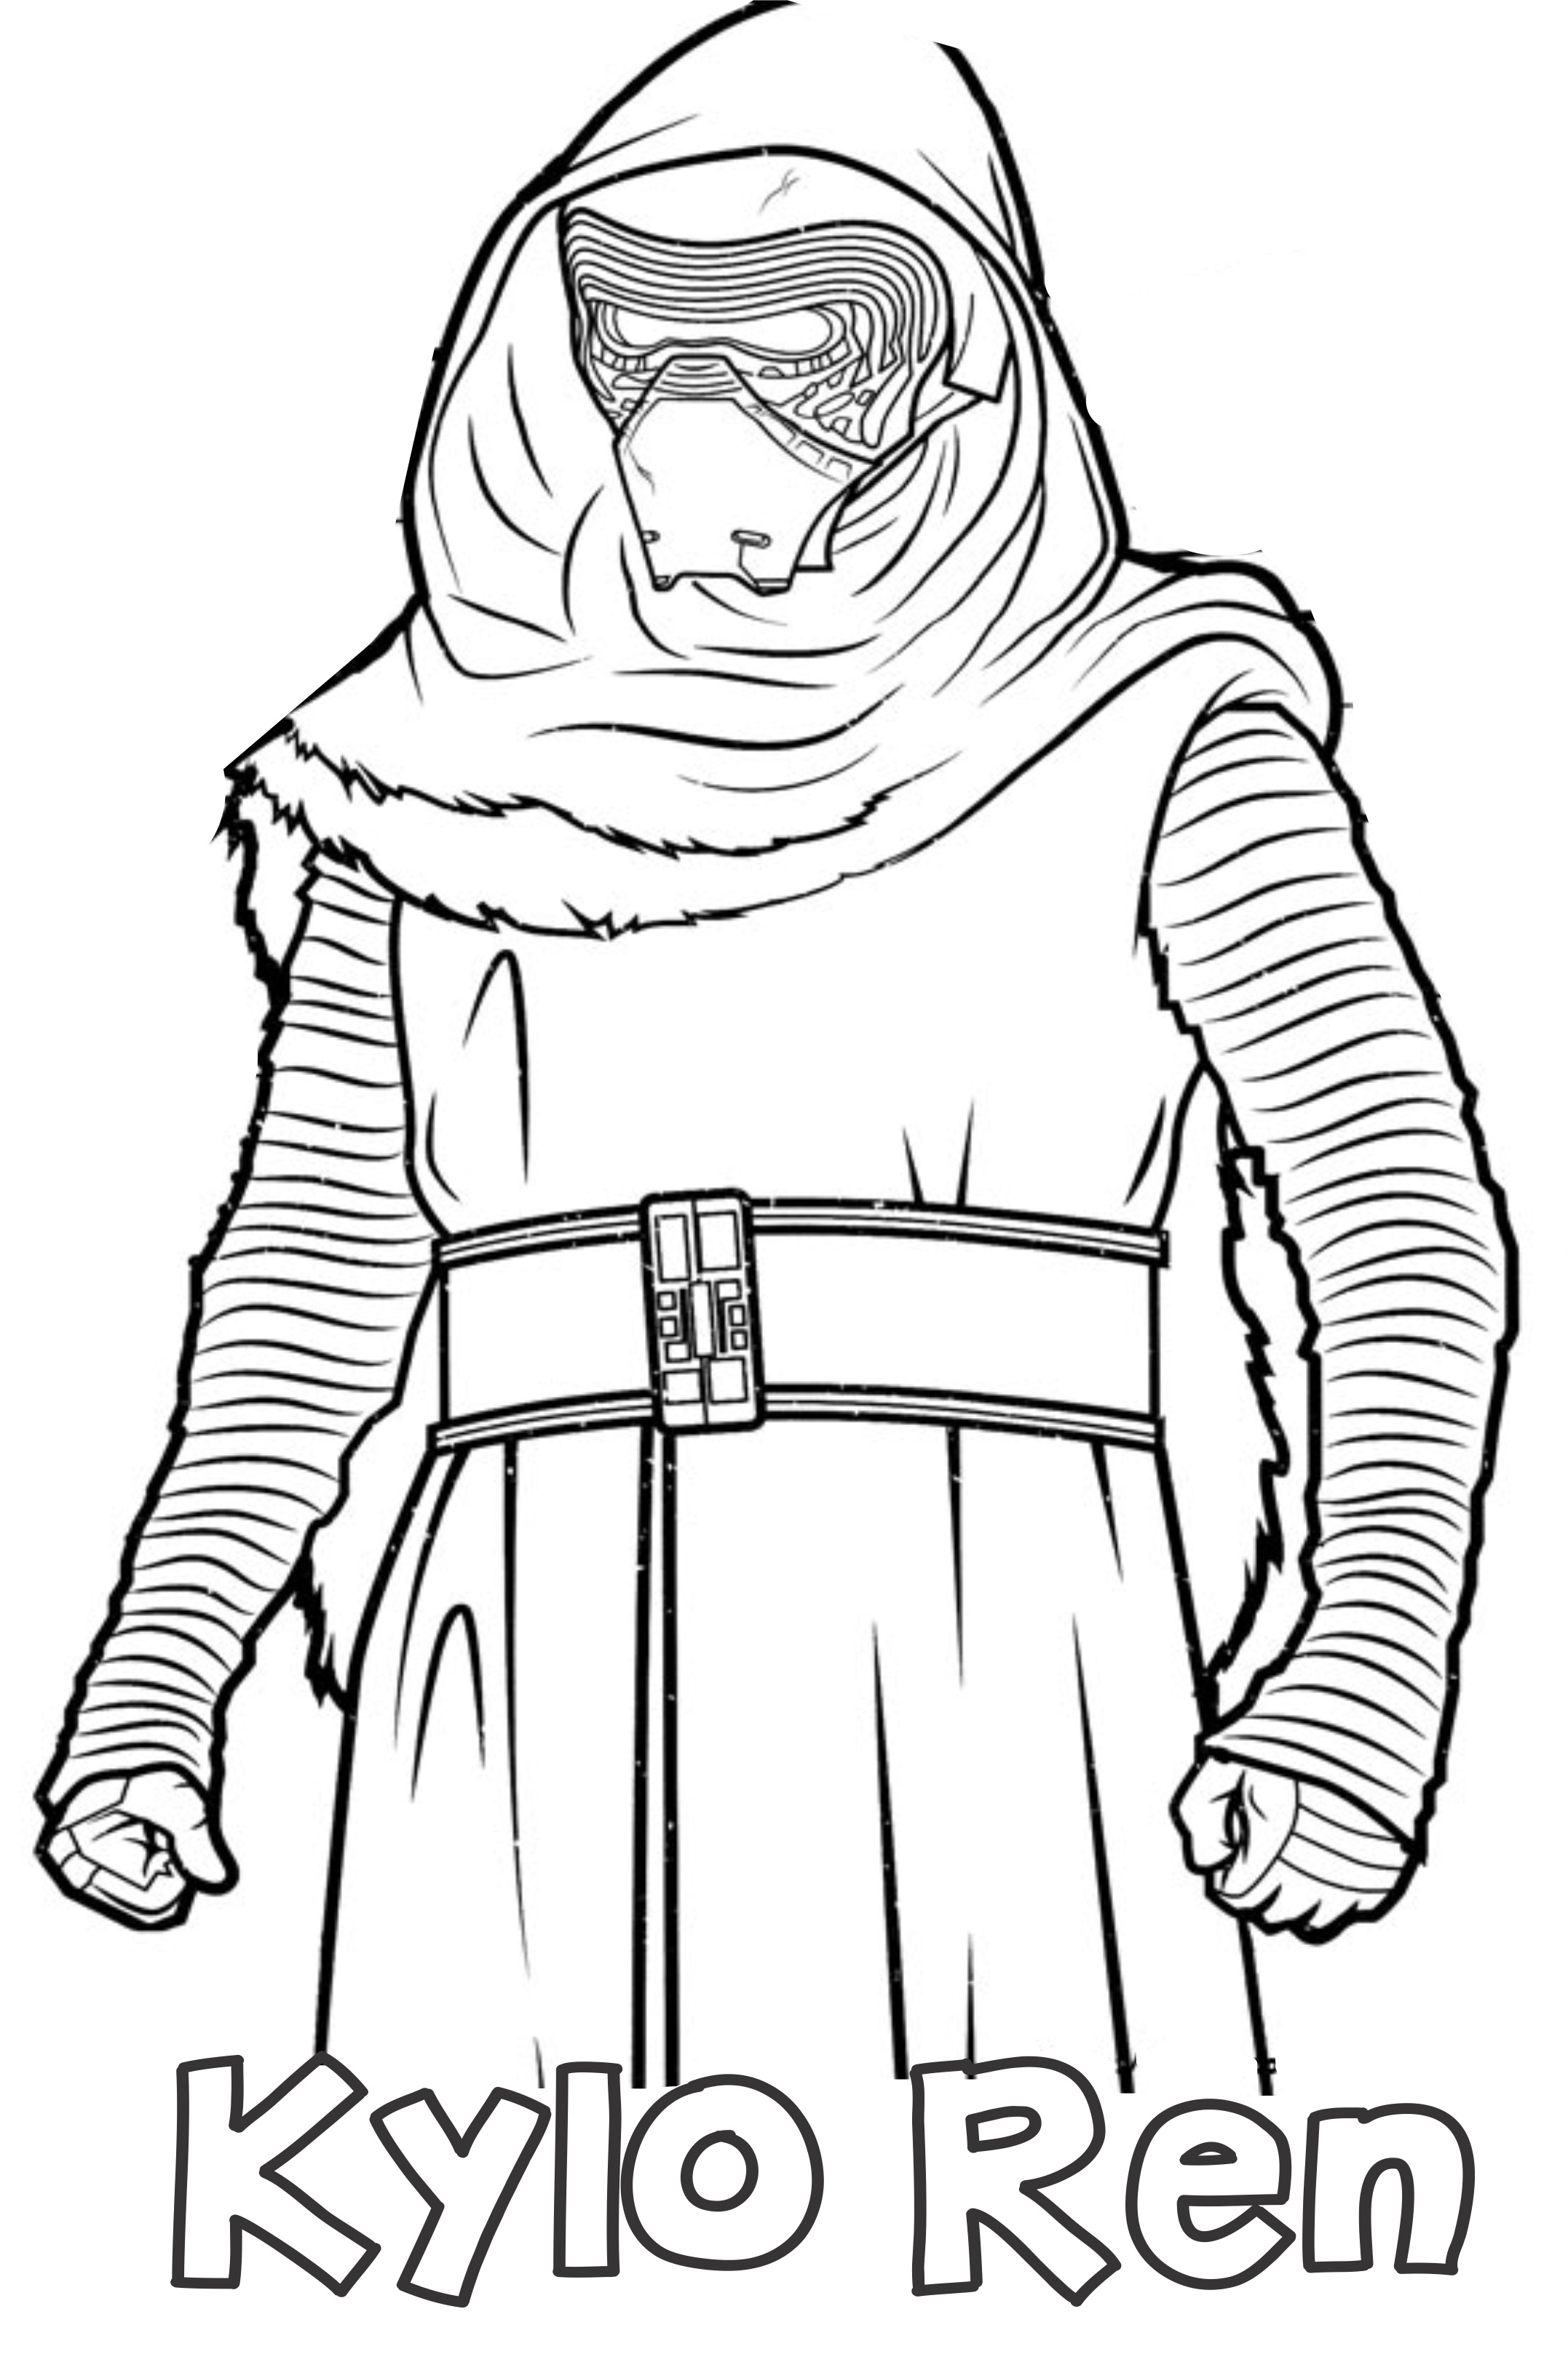 Kylo Ren Coloring Pages - Coloring Home